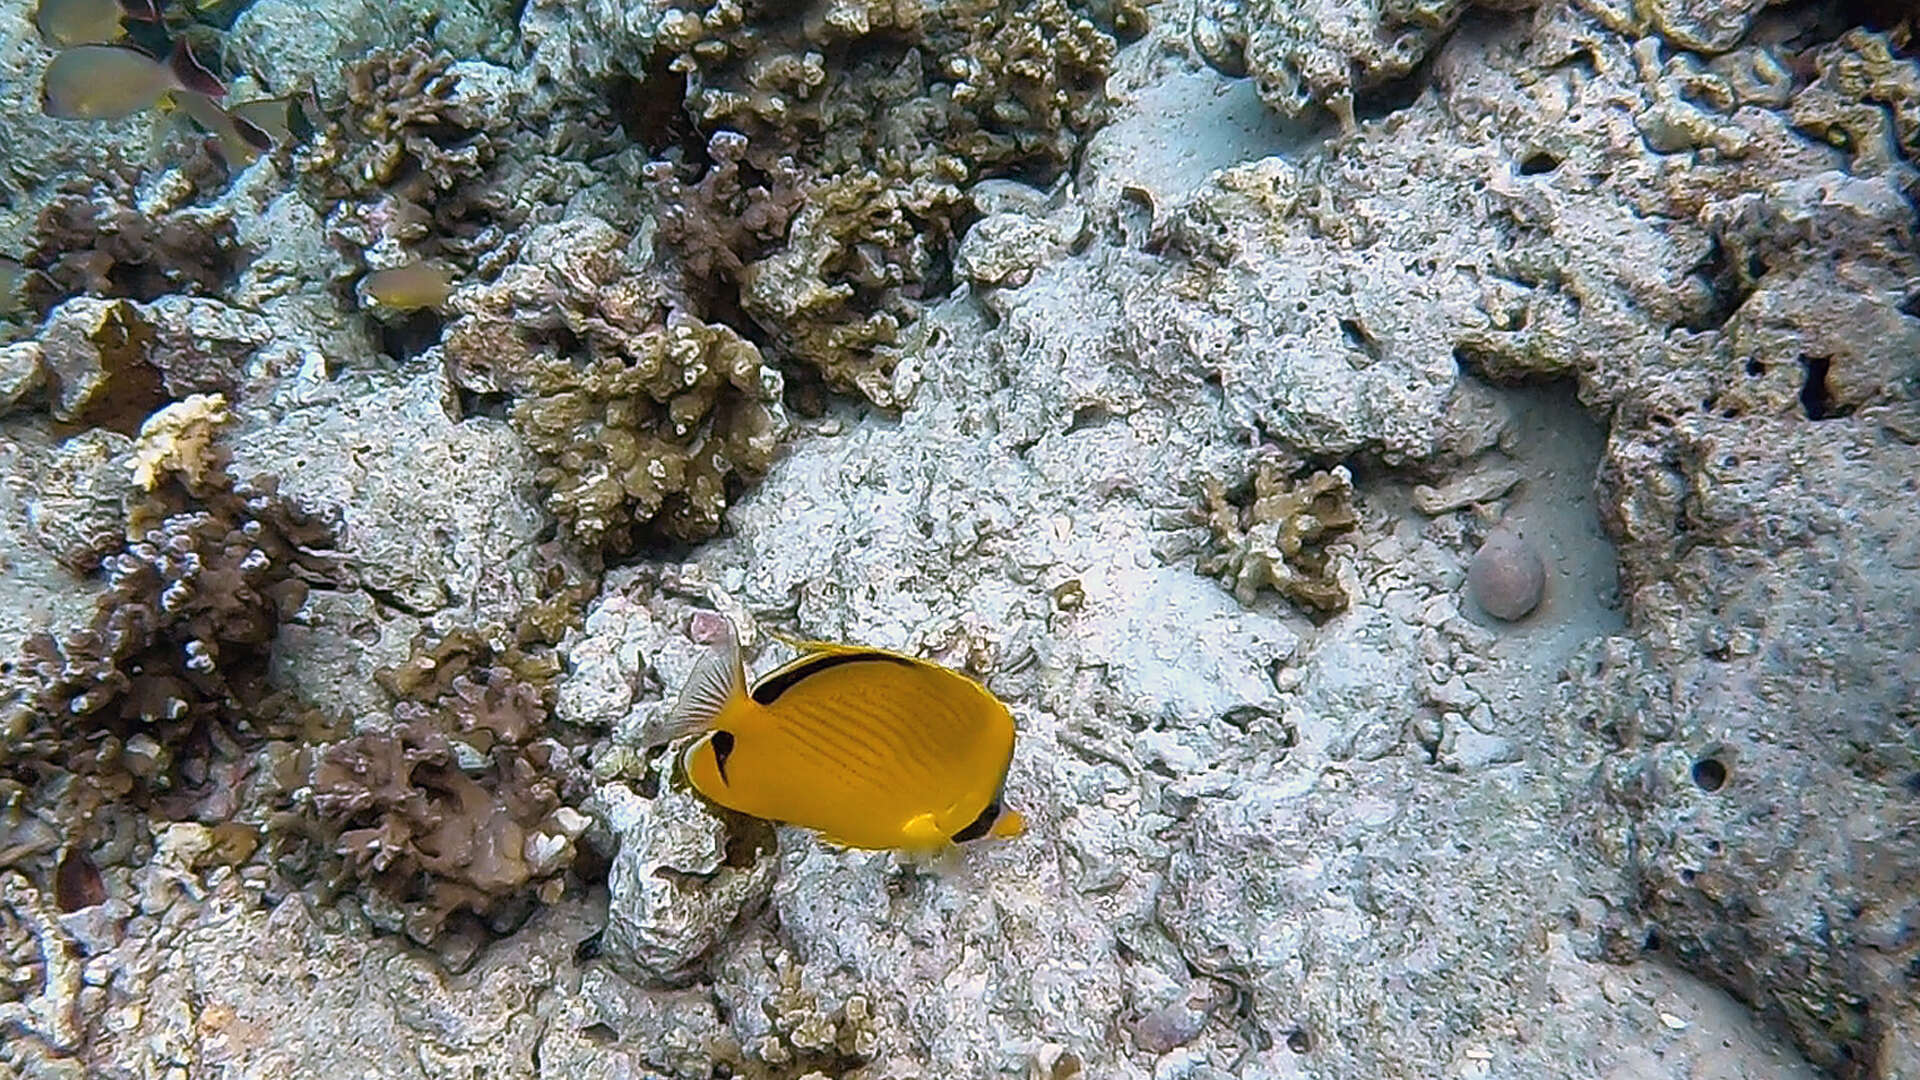 Image of Decorated Butterflyfish